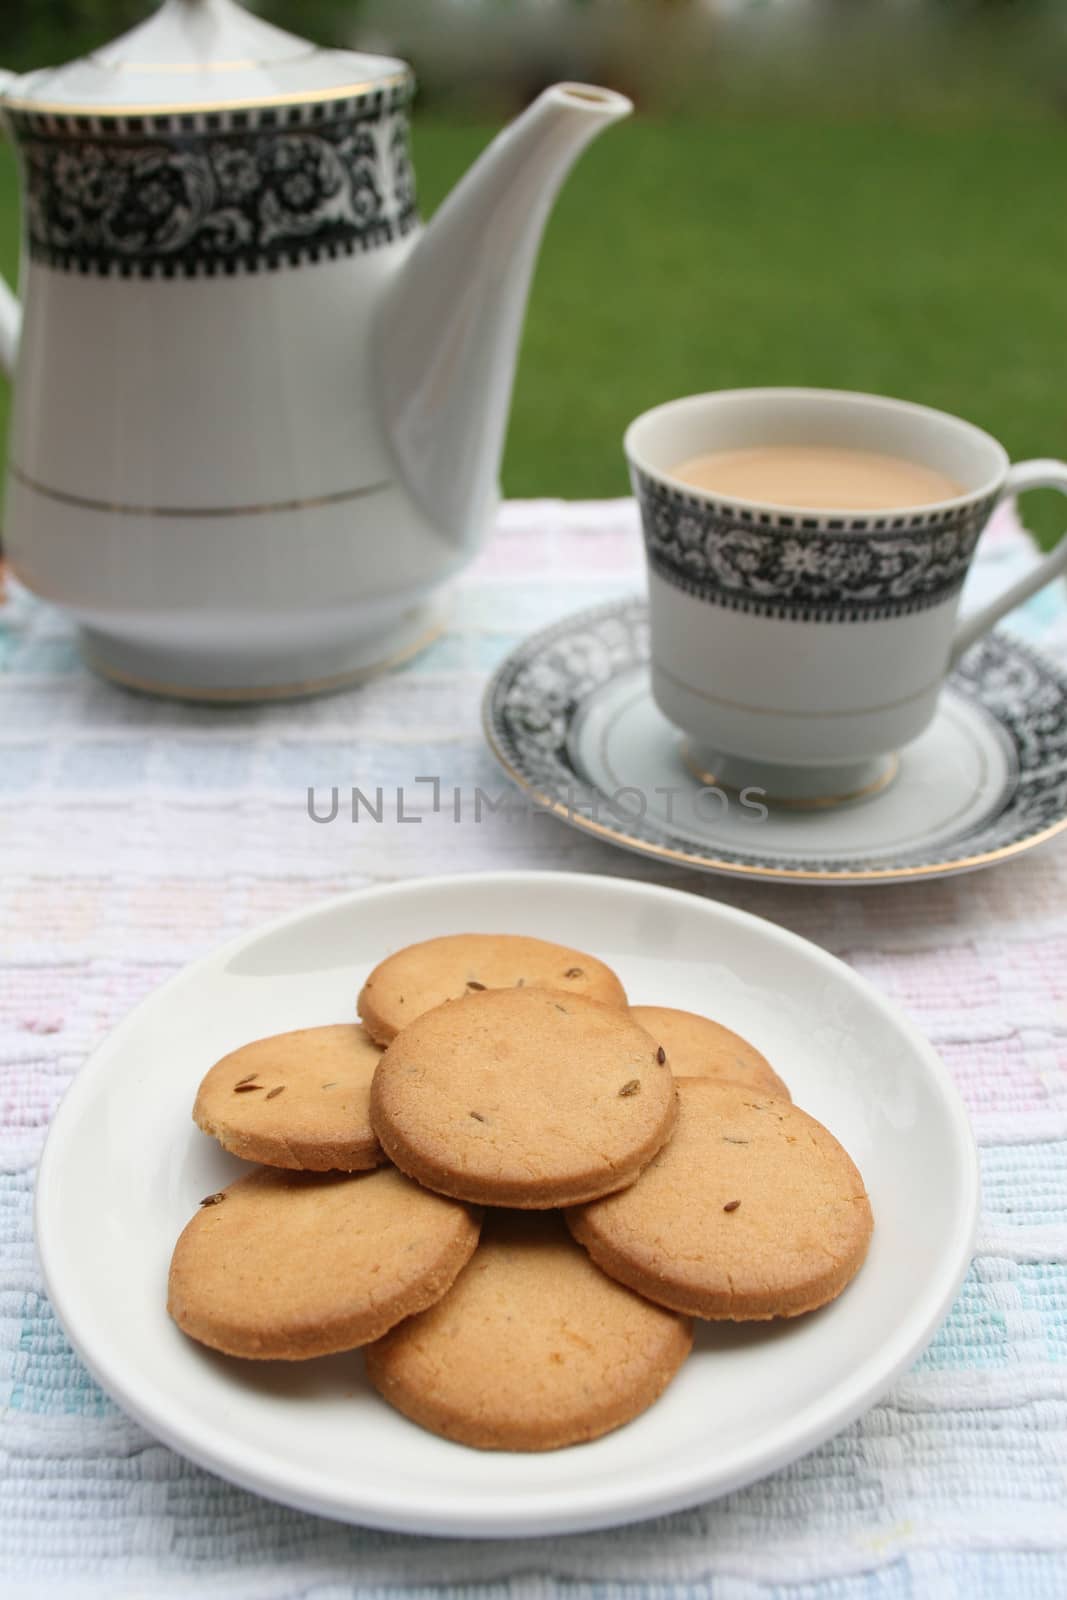 Plate full of biscuits served with tea pot and a cup